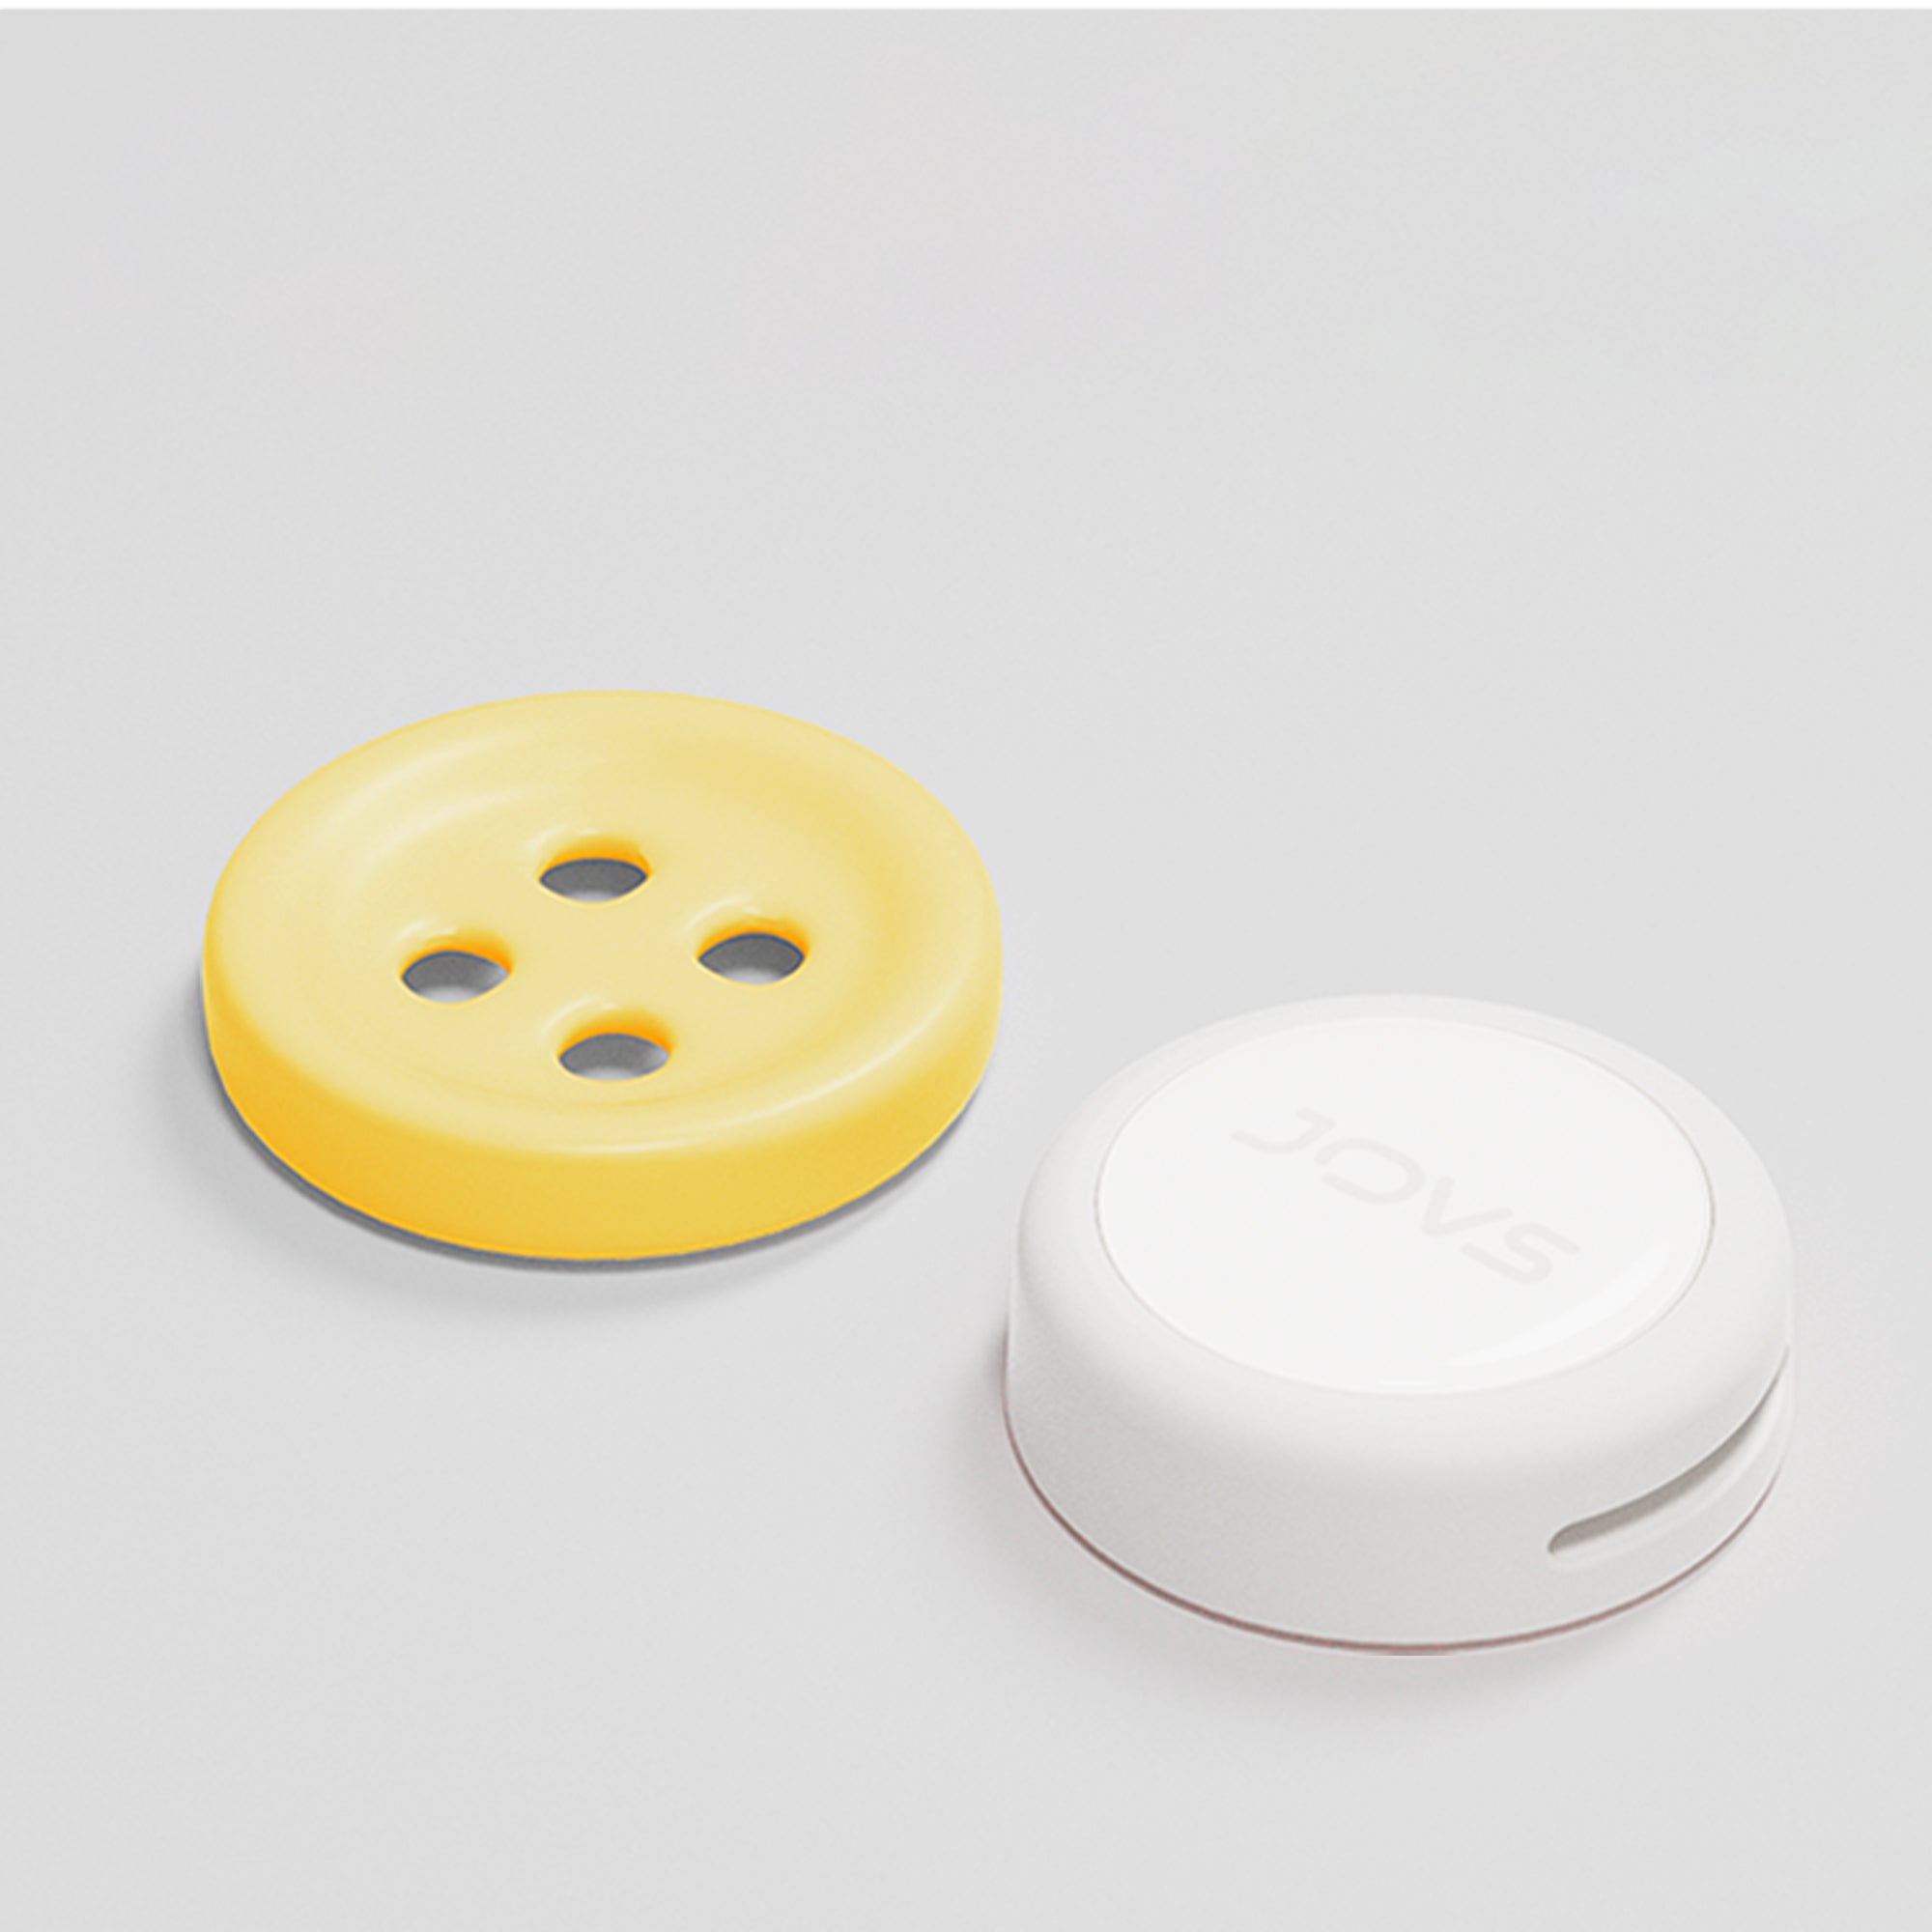 JOVS Acnebye LED Therapy Patch is small and compact, the size of a button.